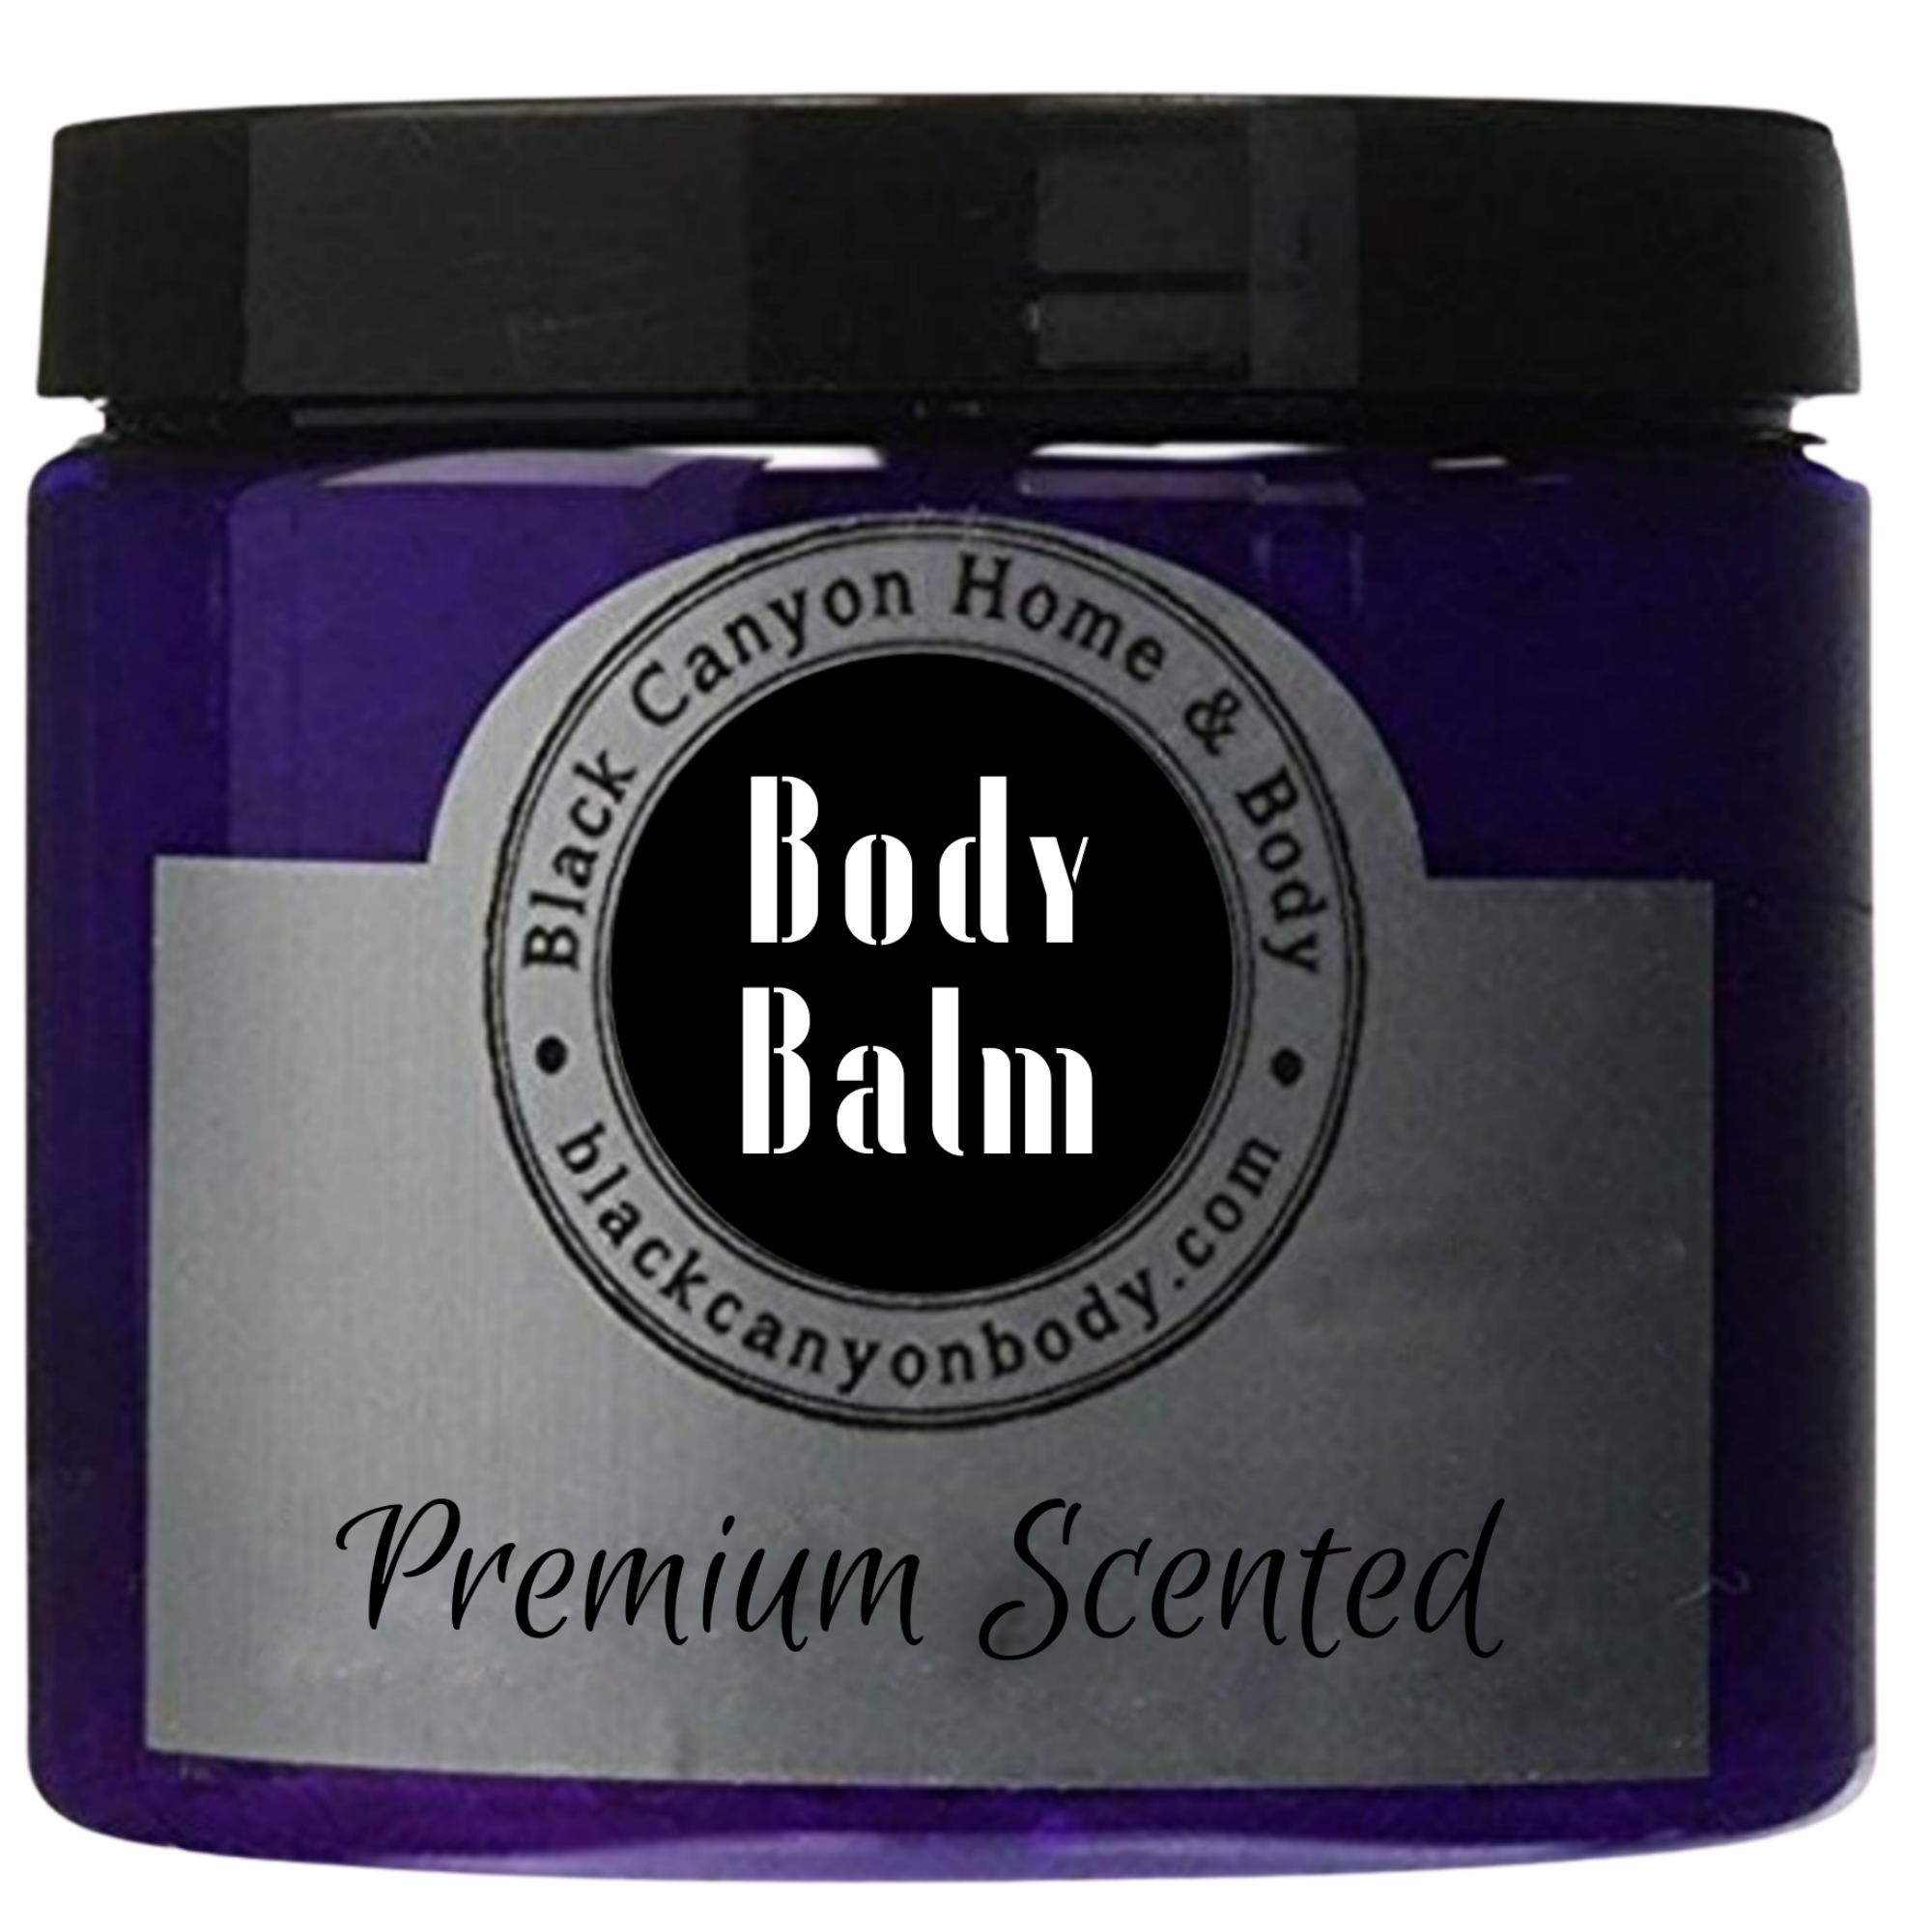 Black Canyon Black Currant Tea Scented Natural Body Balm with Shea